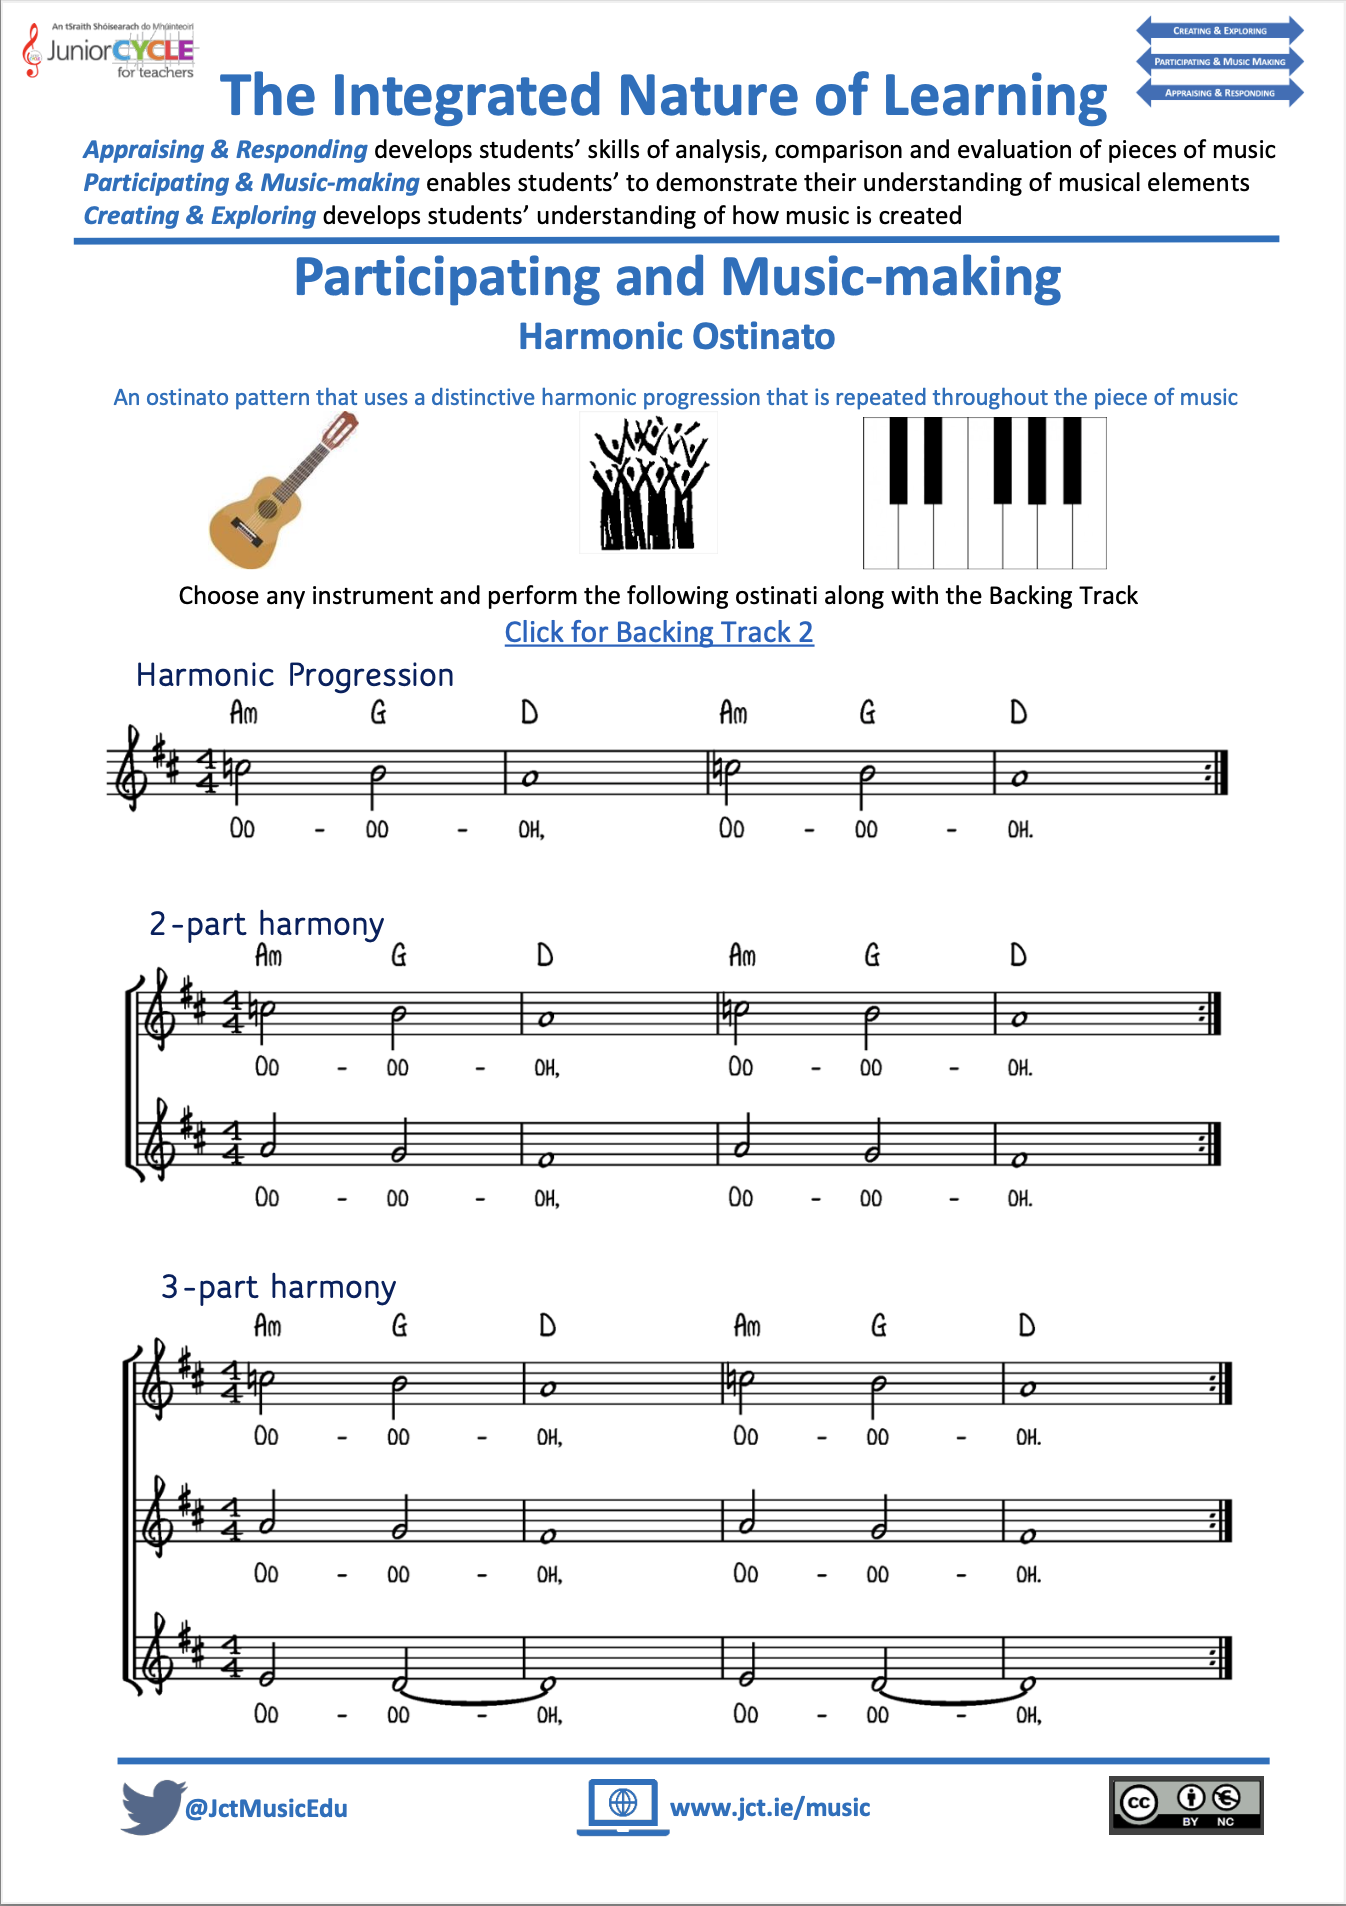 The Integrated Nature of Learning: Participating and Music Making (Harmonic Ostinato 2)